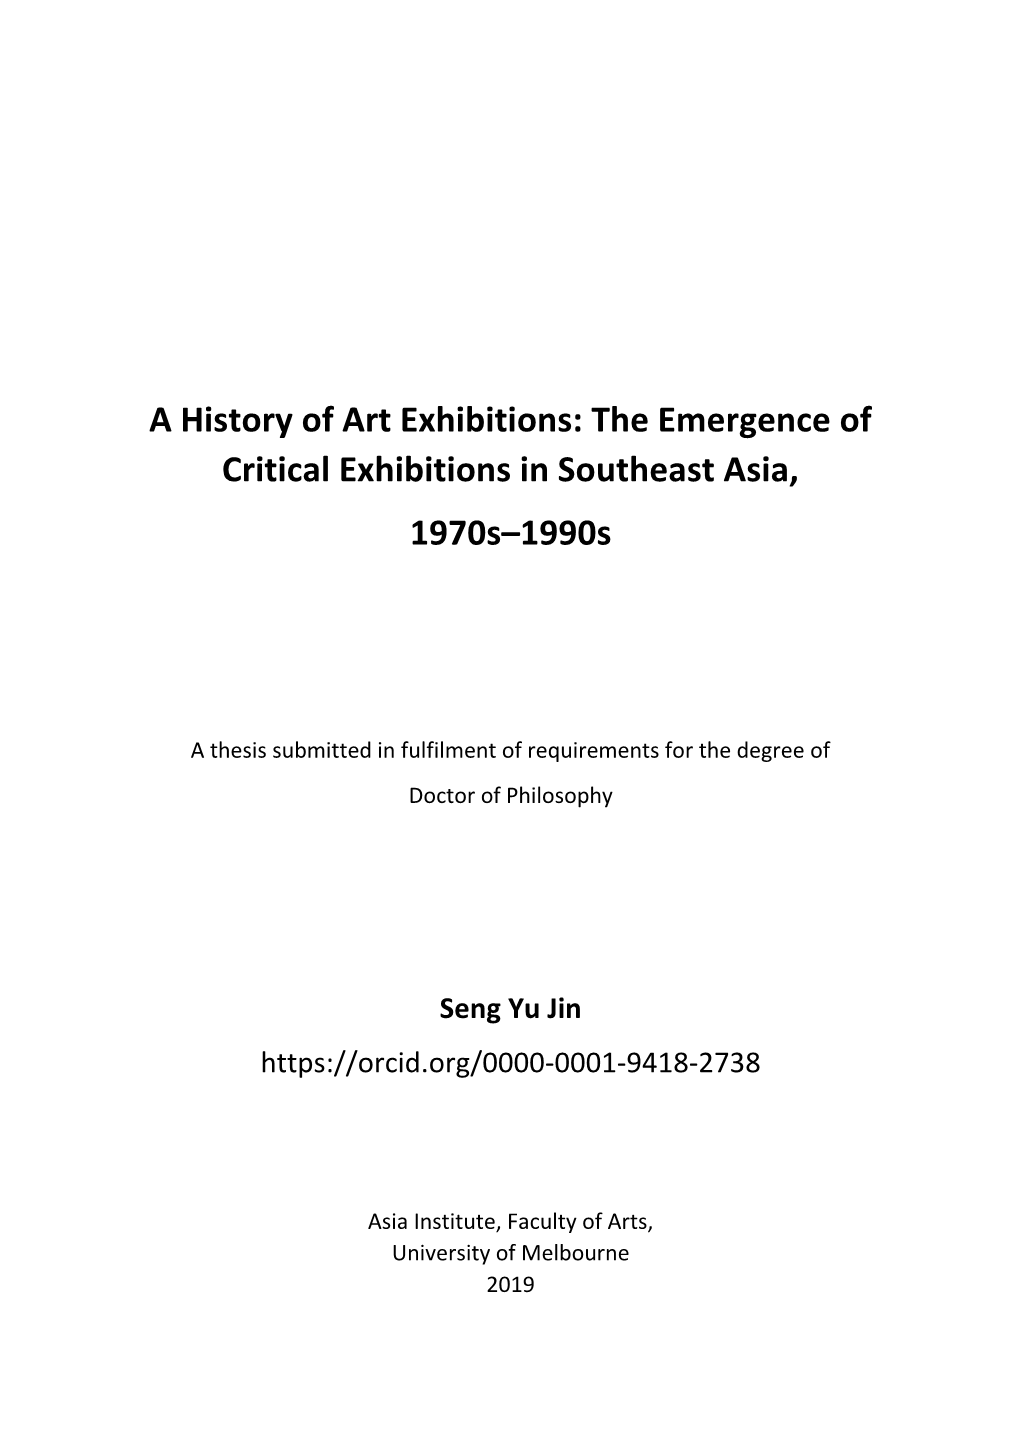 The Emergence of Critical Exhibitions in Southeast Asia, 1970S–1990S